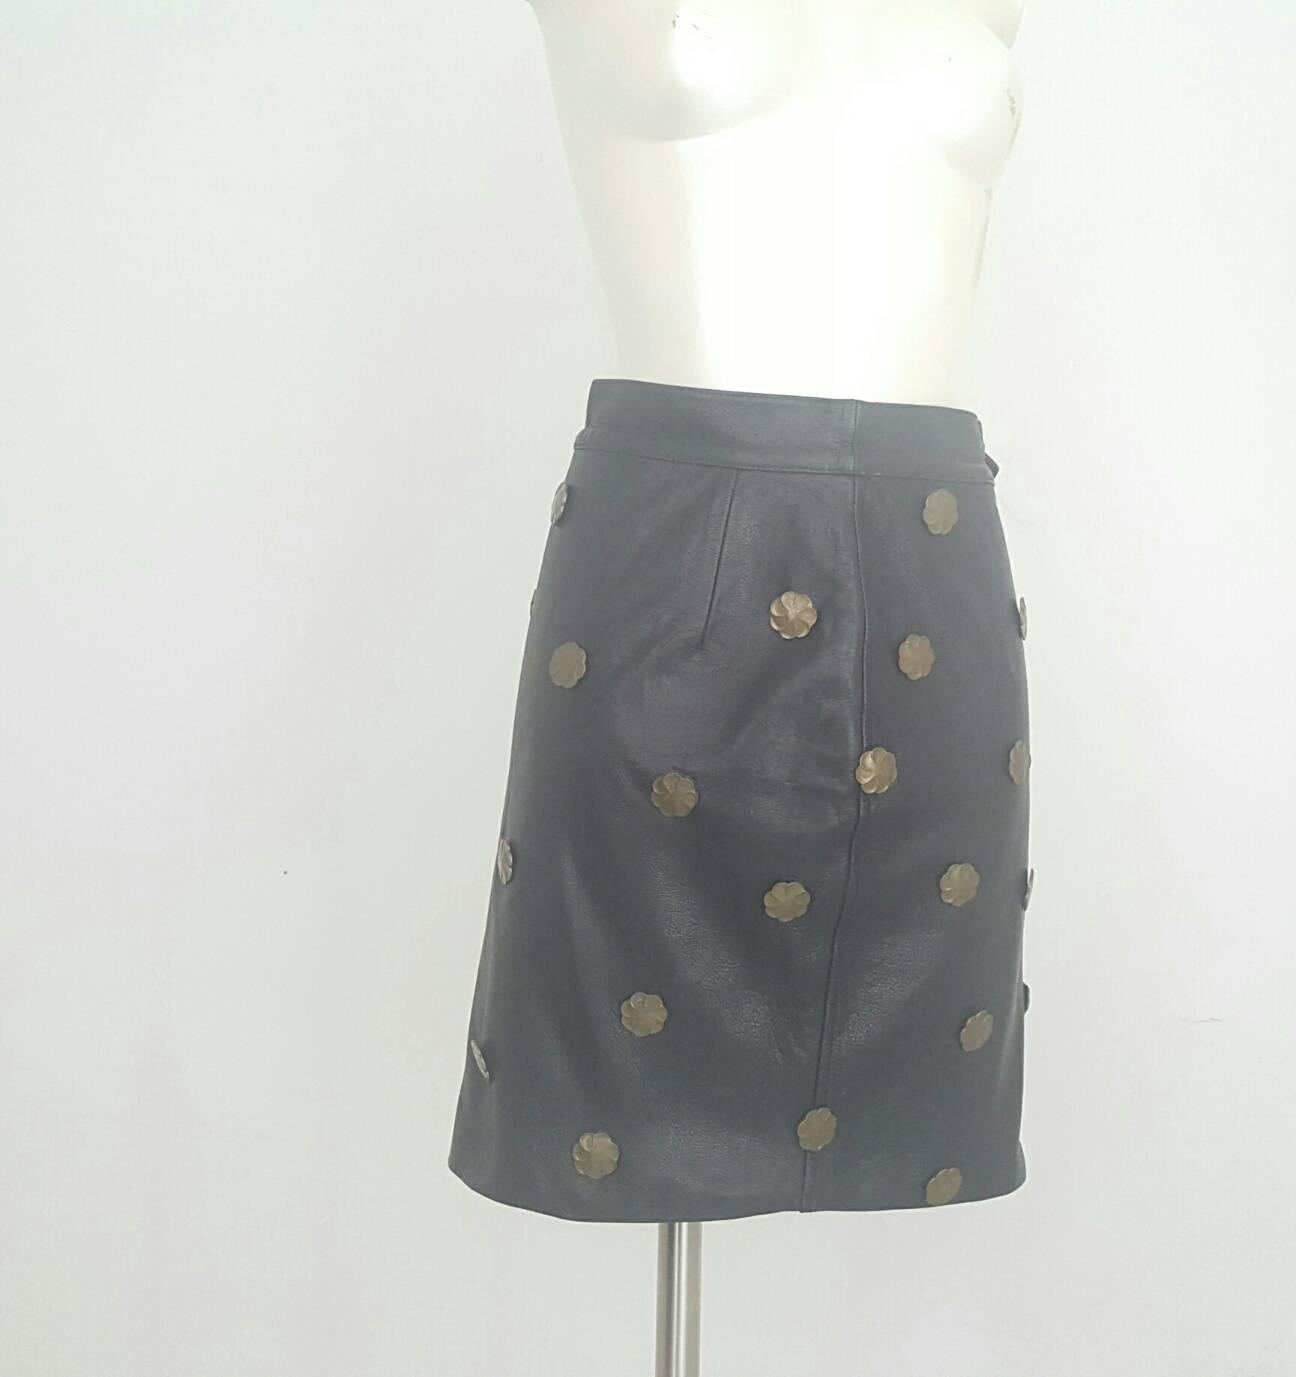 1980s Moschino black leather skirt with brass gold flowers. 
No laber attached but size is 42 or 44 italian size range. 
Composition 100% Leather